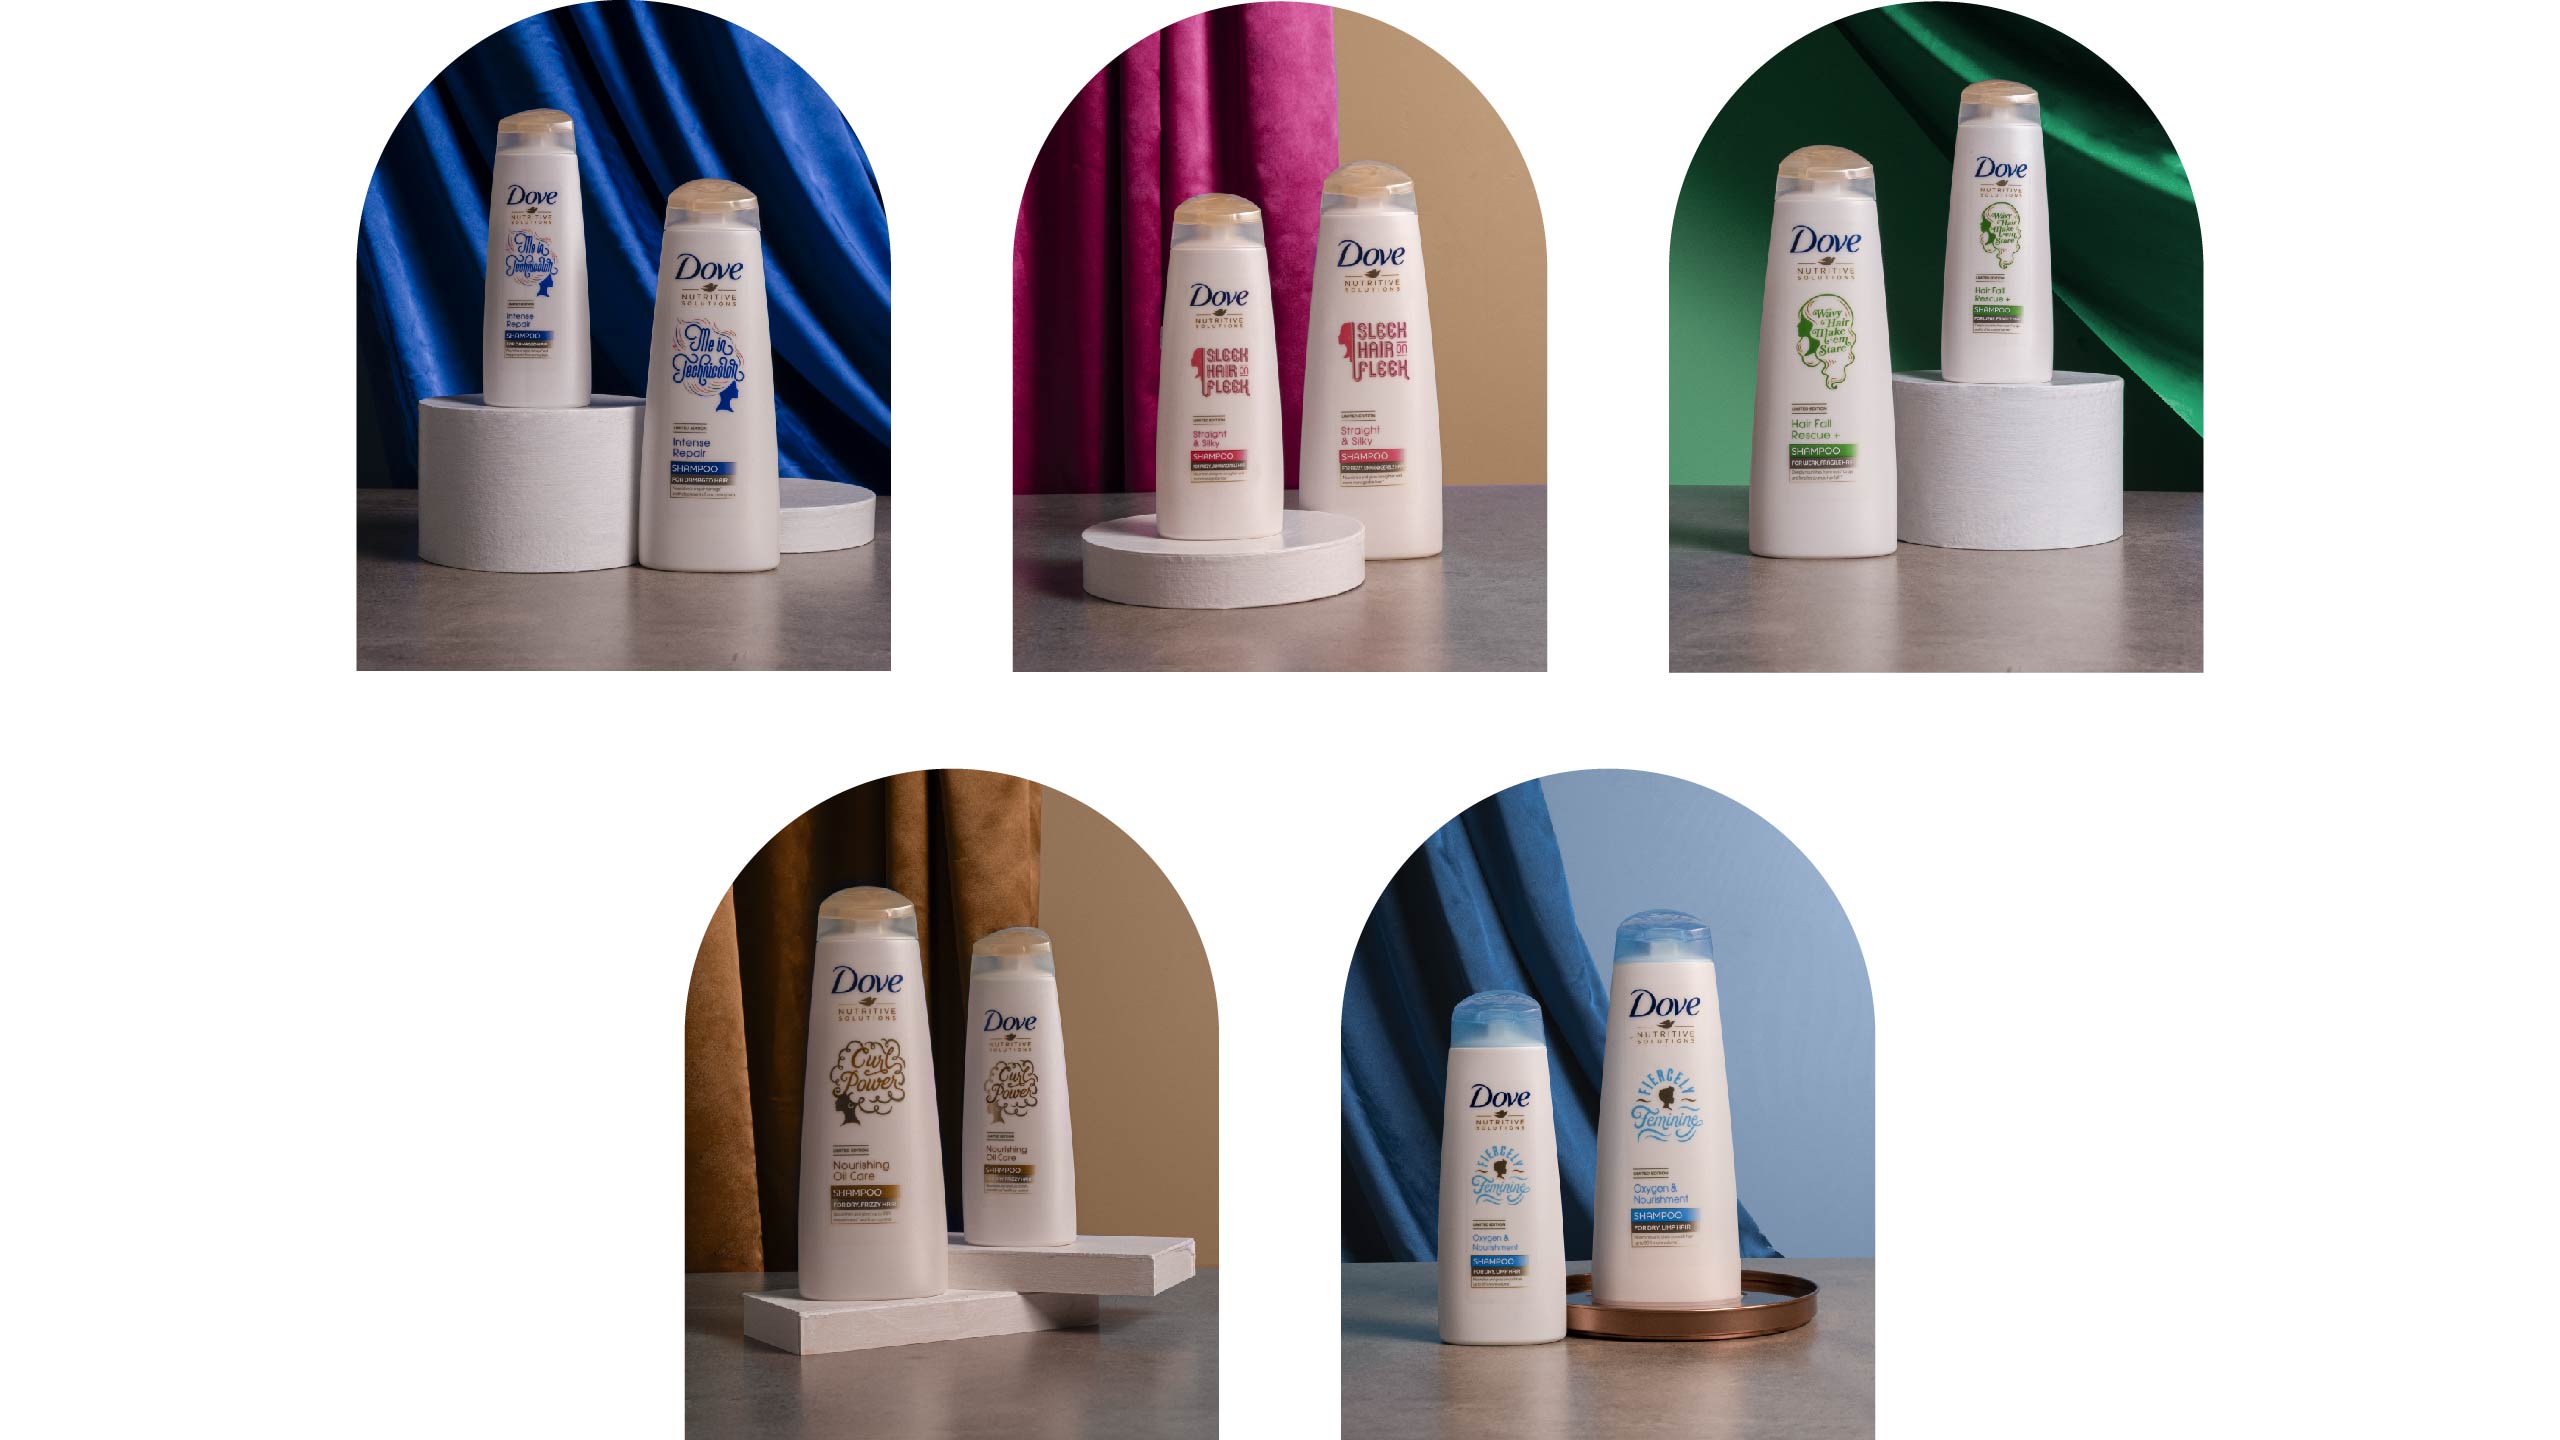 Dove-Packaging-Campaign-02